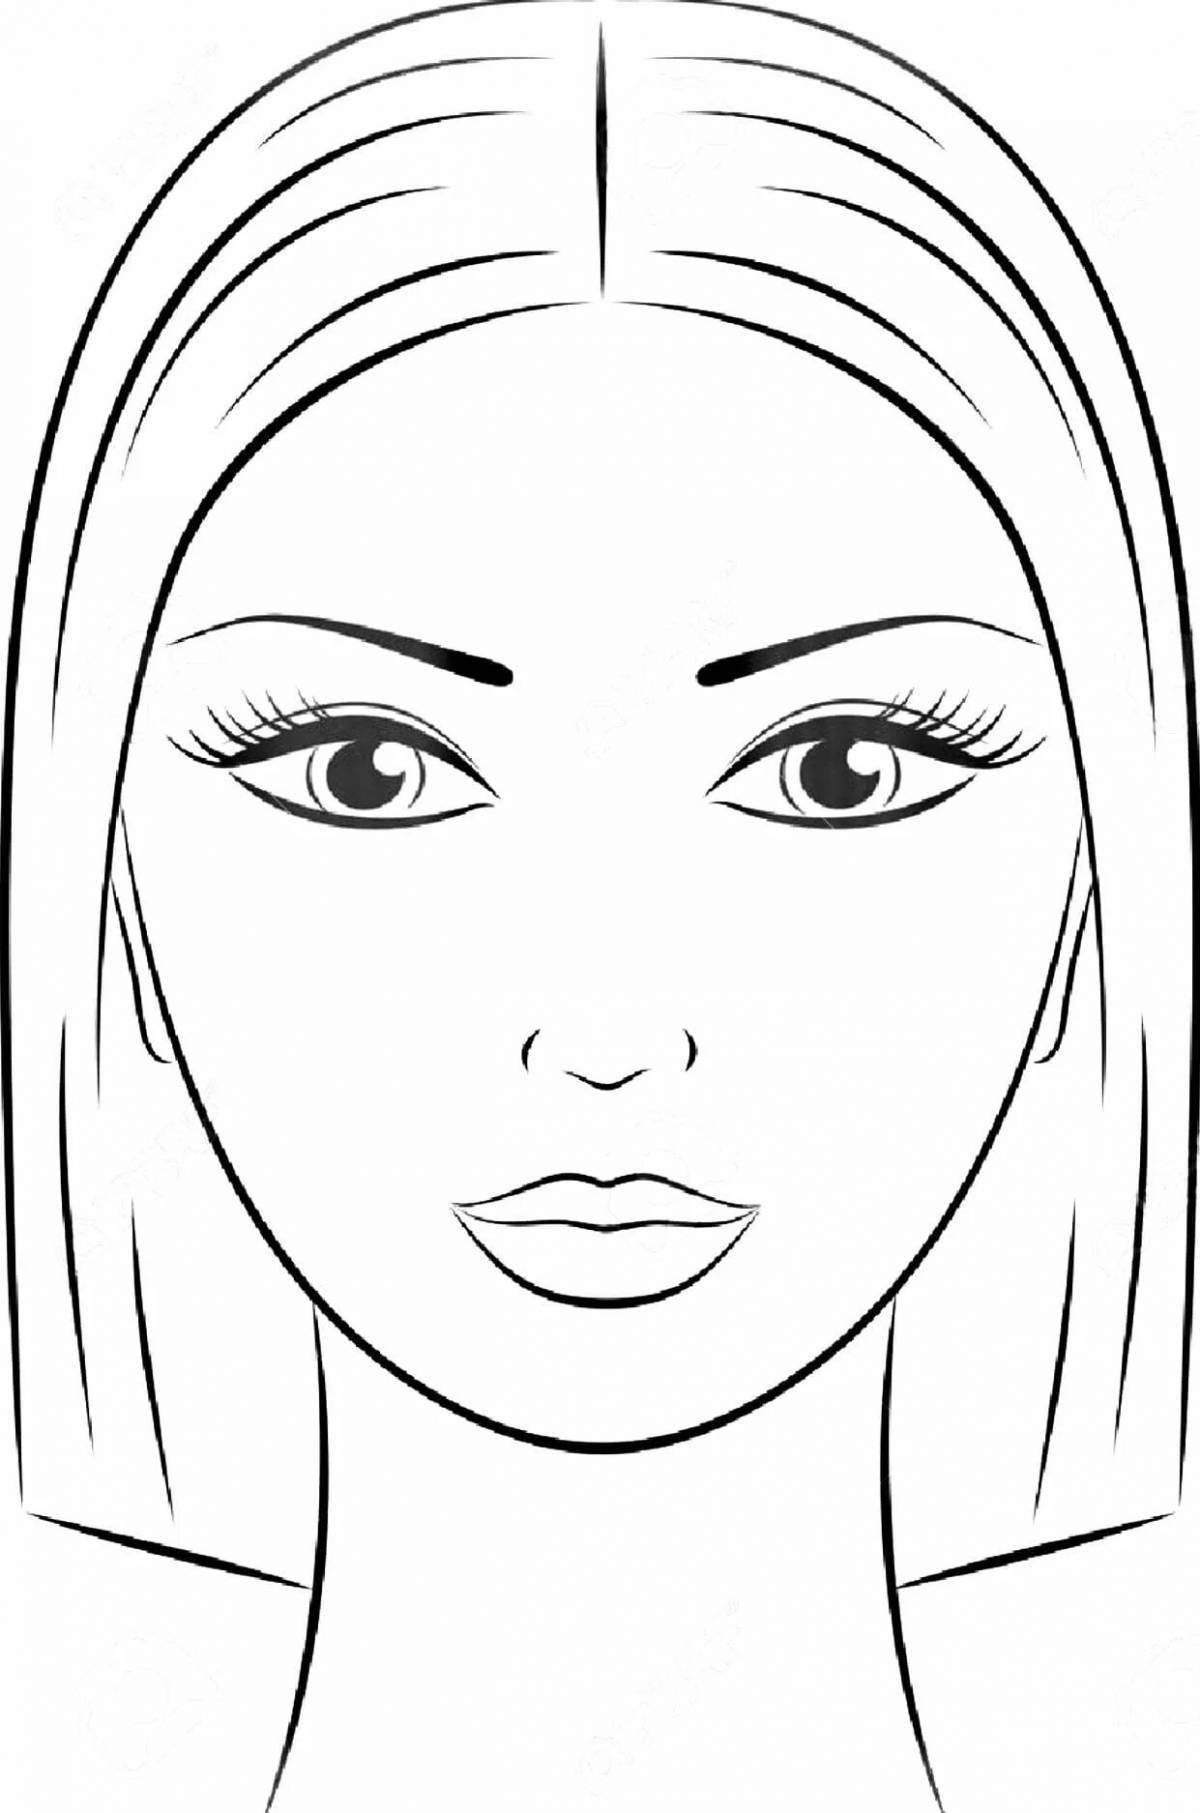 Colorific face coloring page for kids